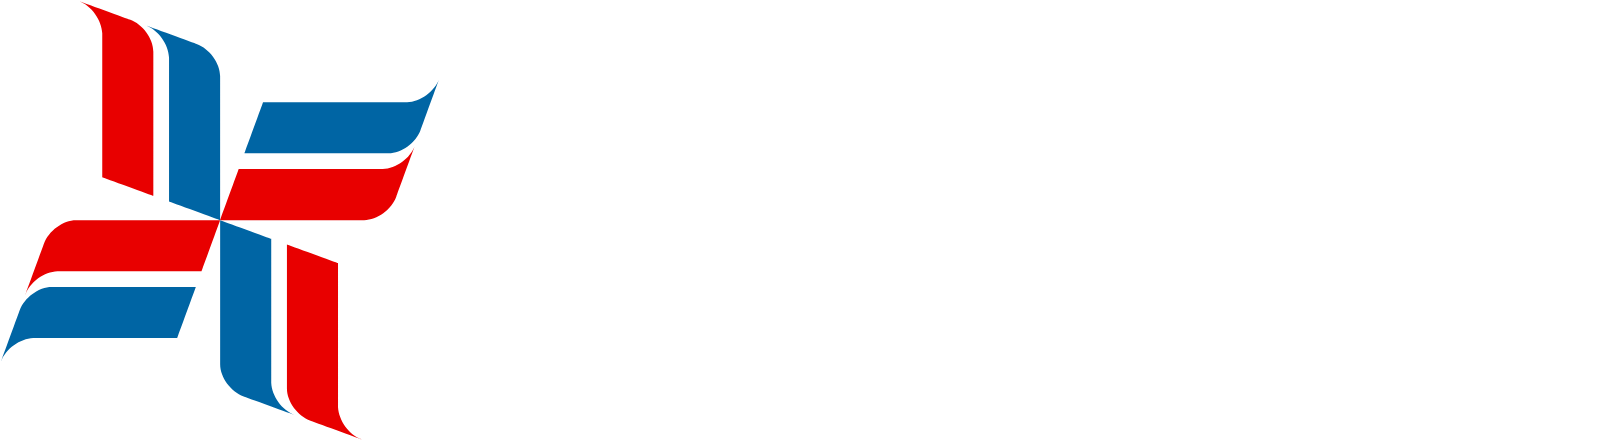 Bristow Group logo large for dark backgrounds (transparent PNG)